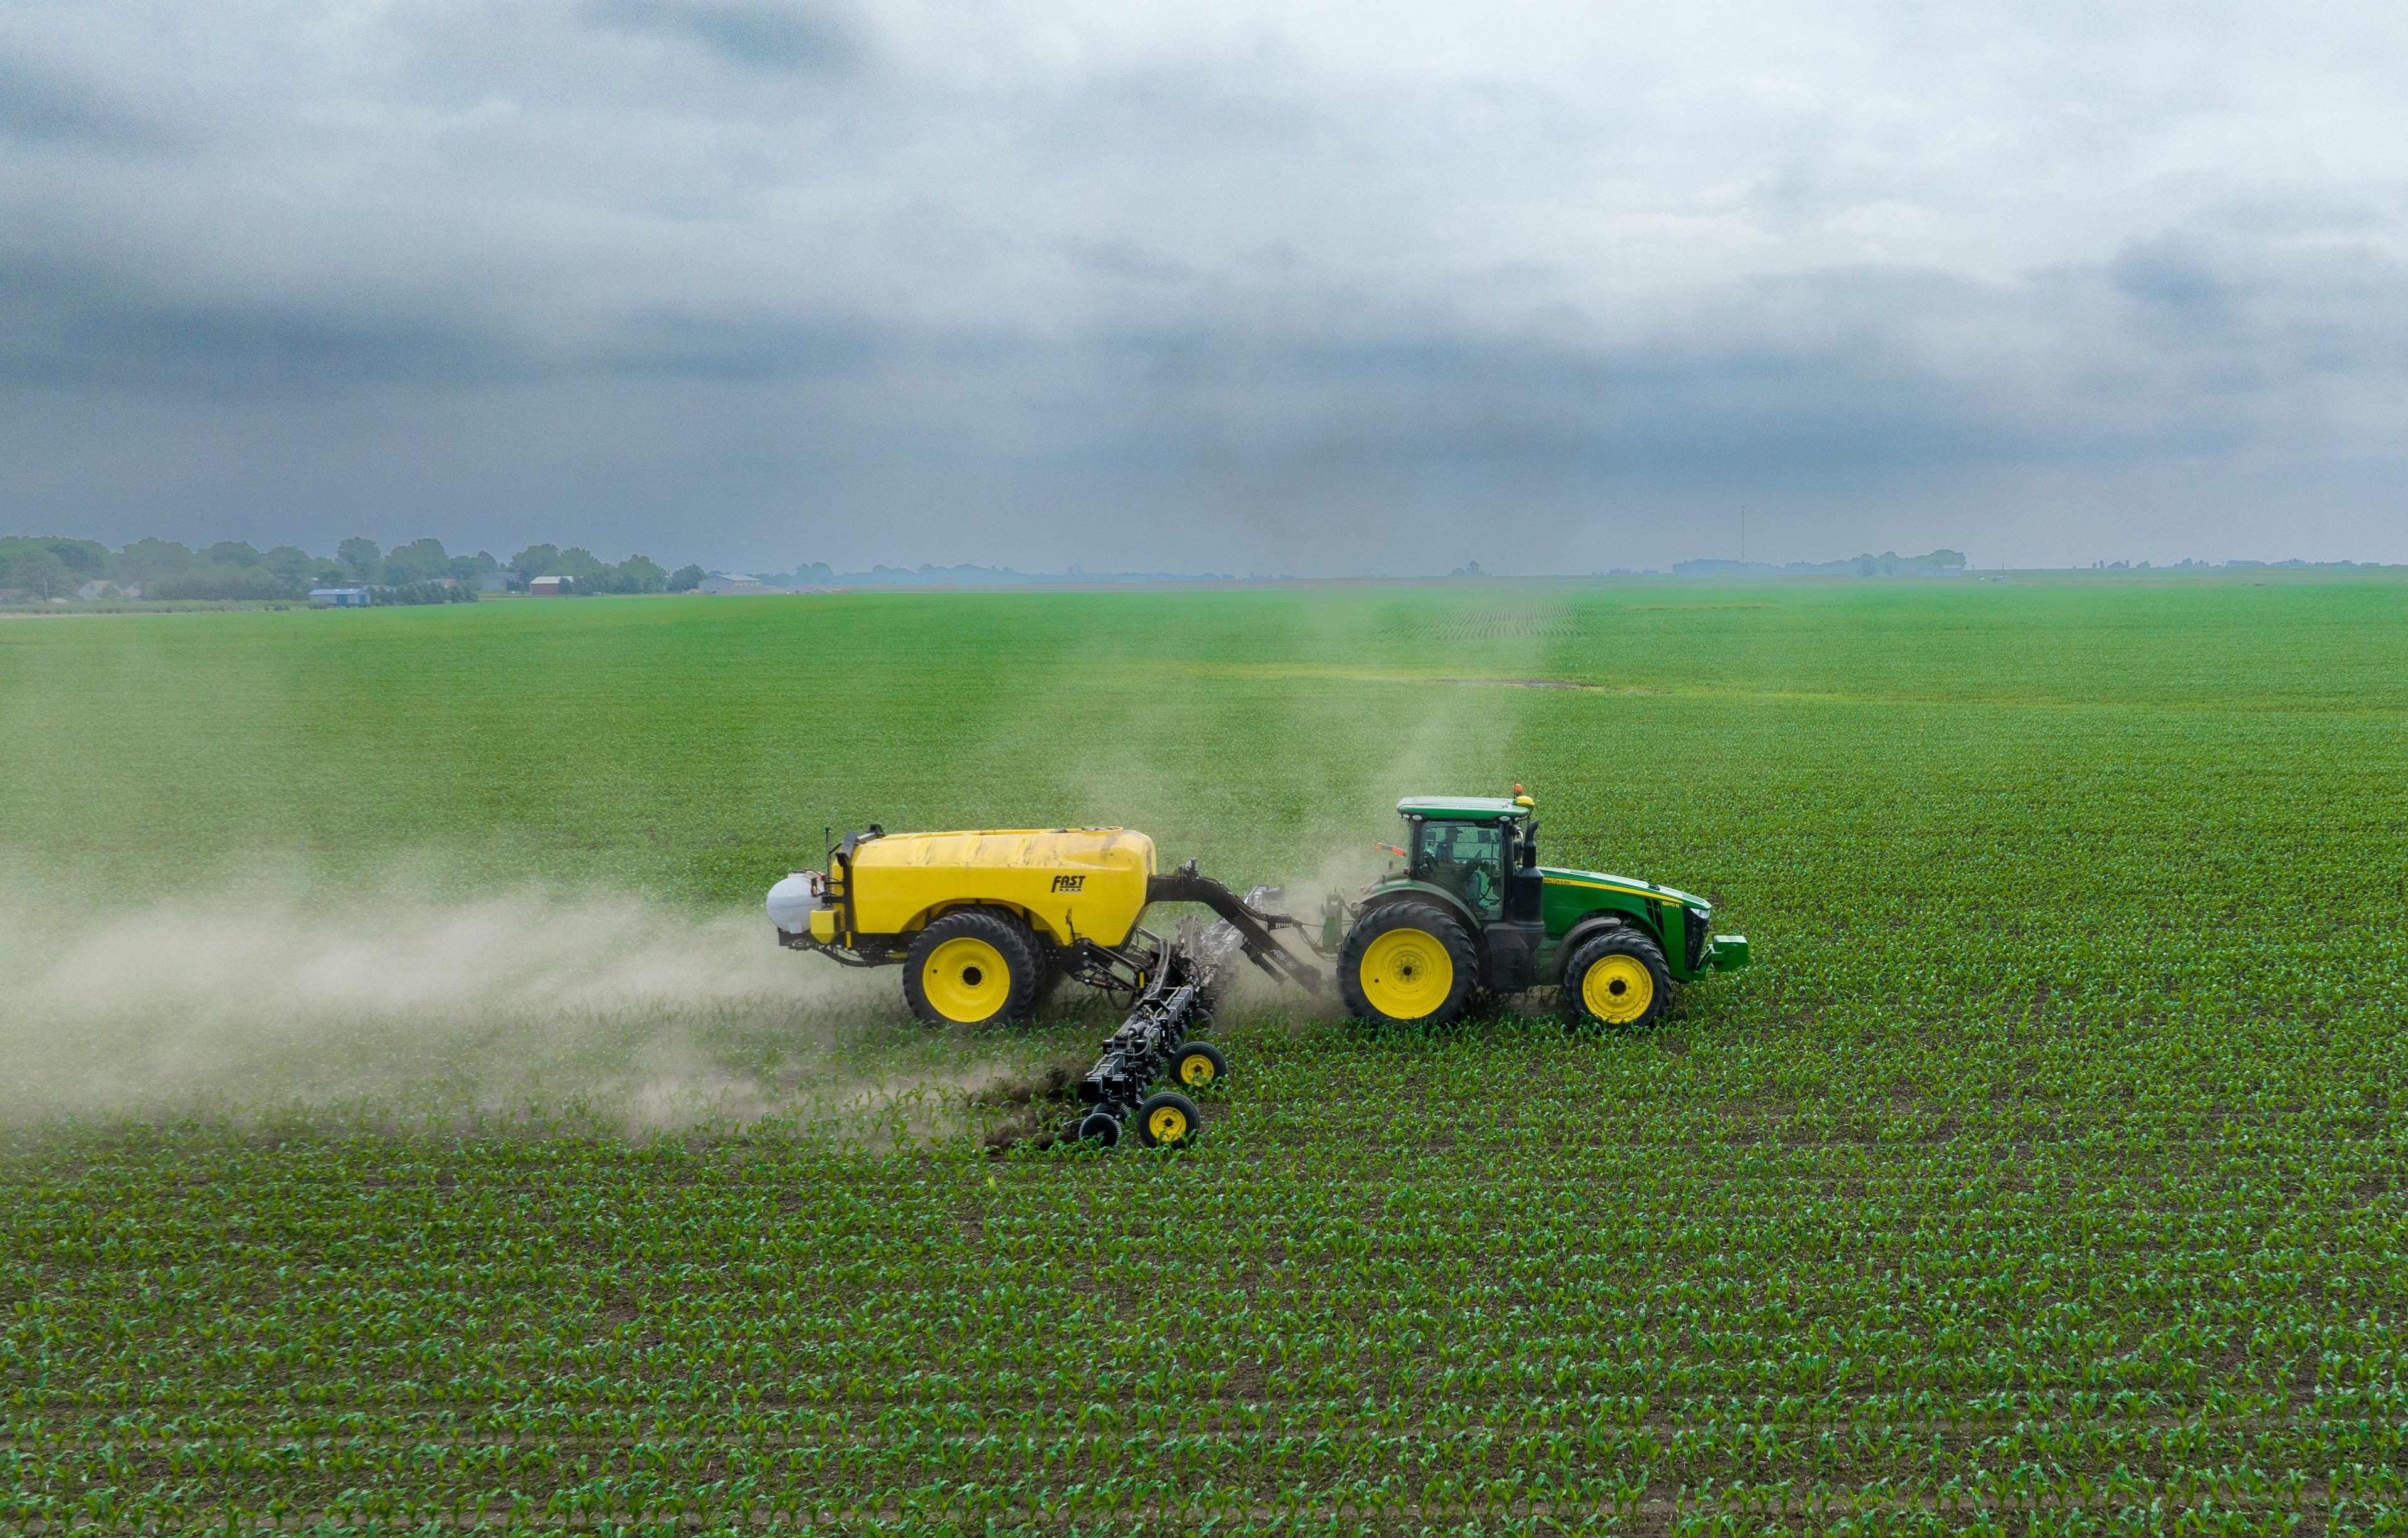 Smart nitrogen management can strongly reduce pollution